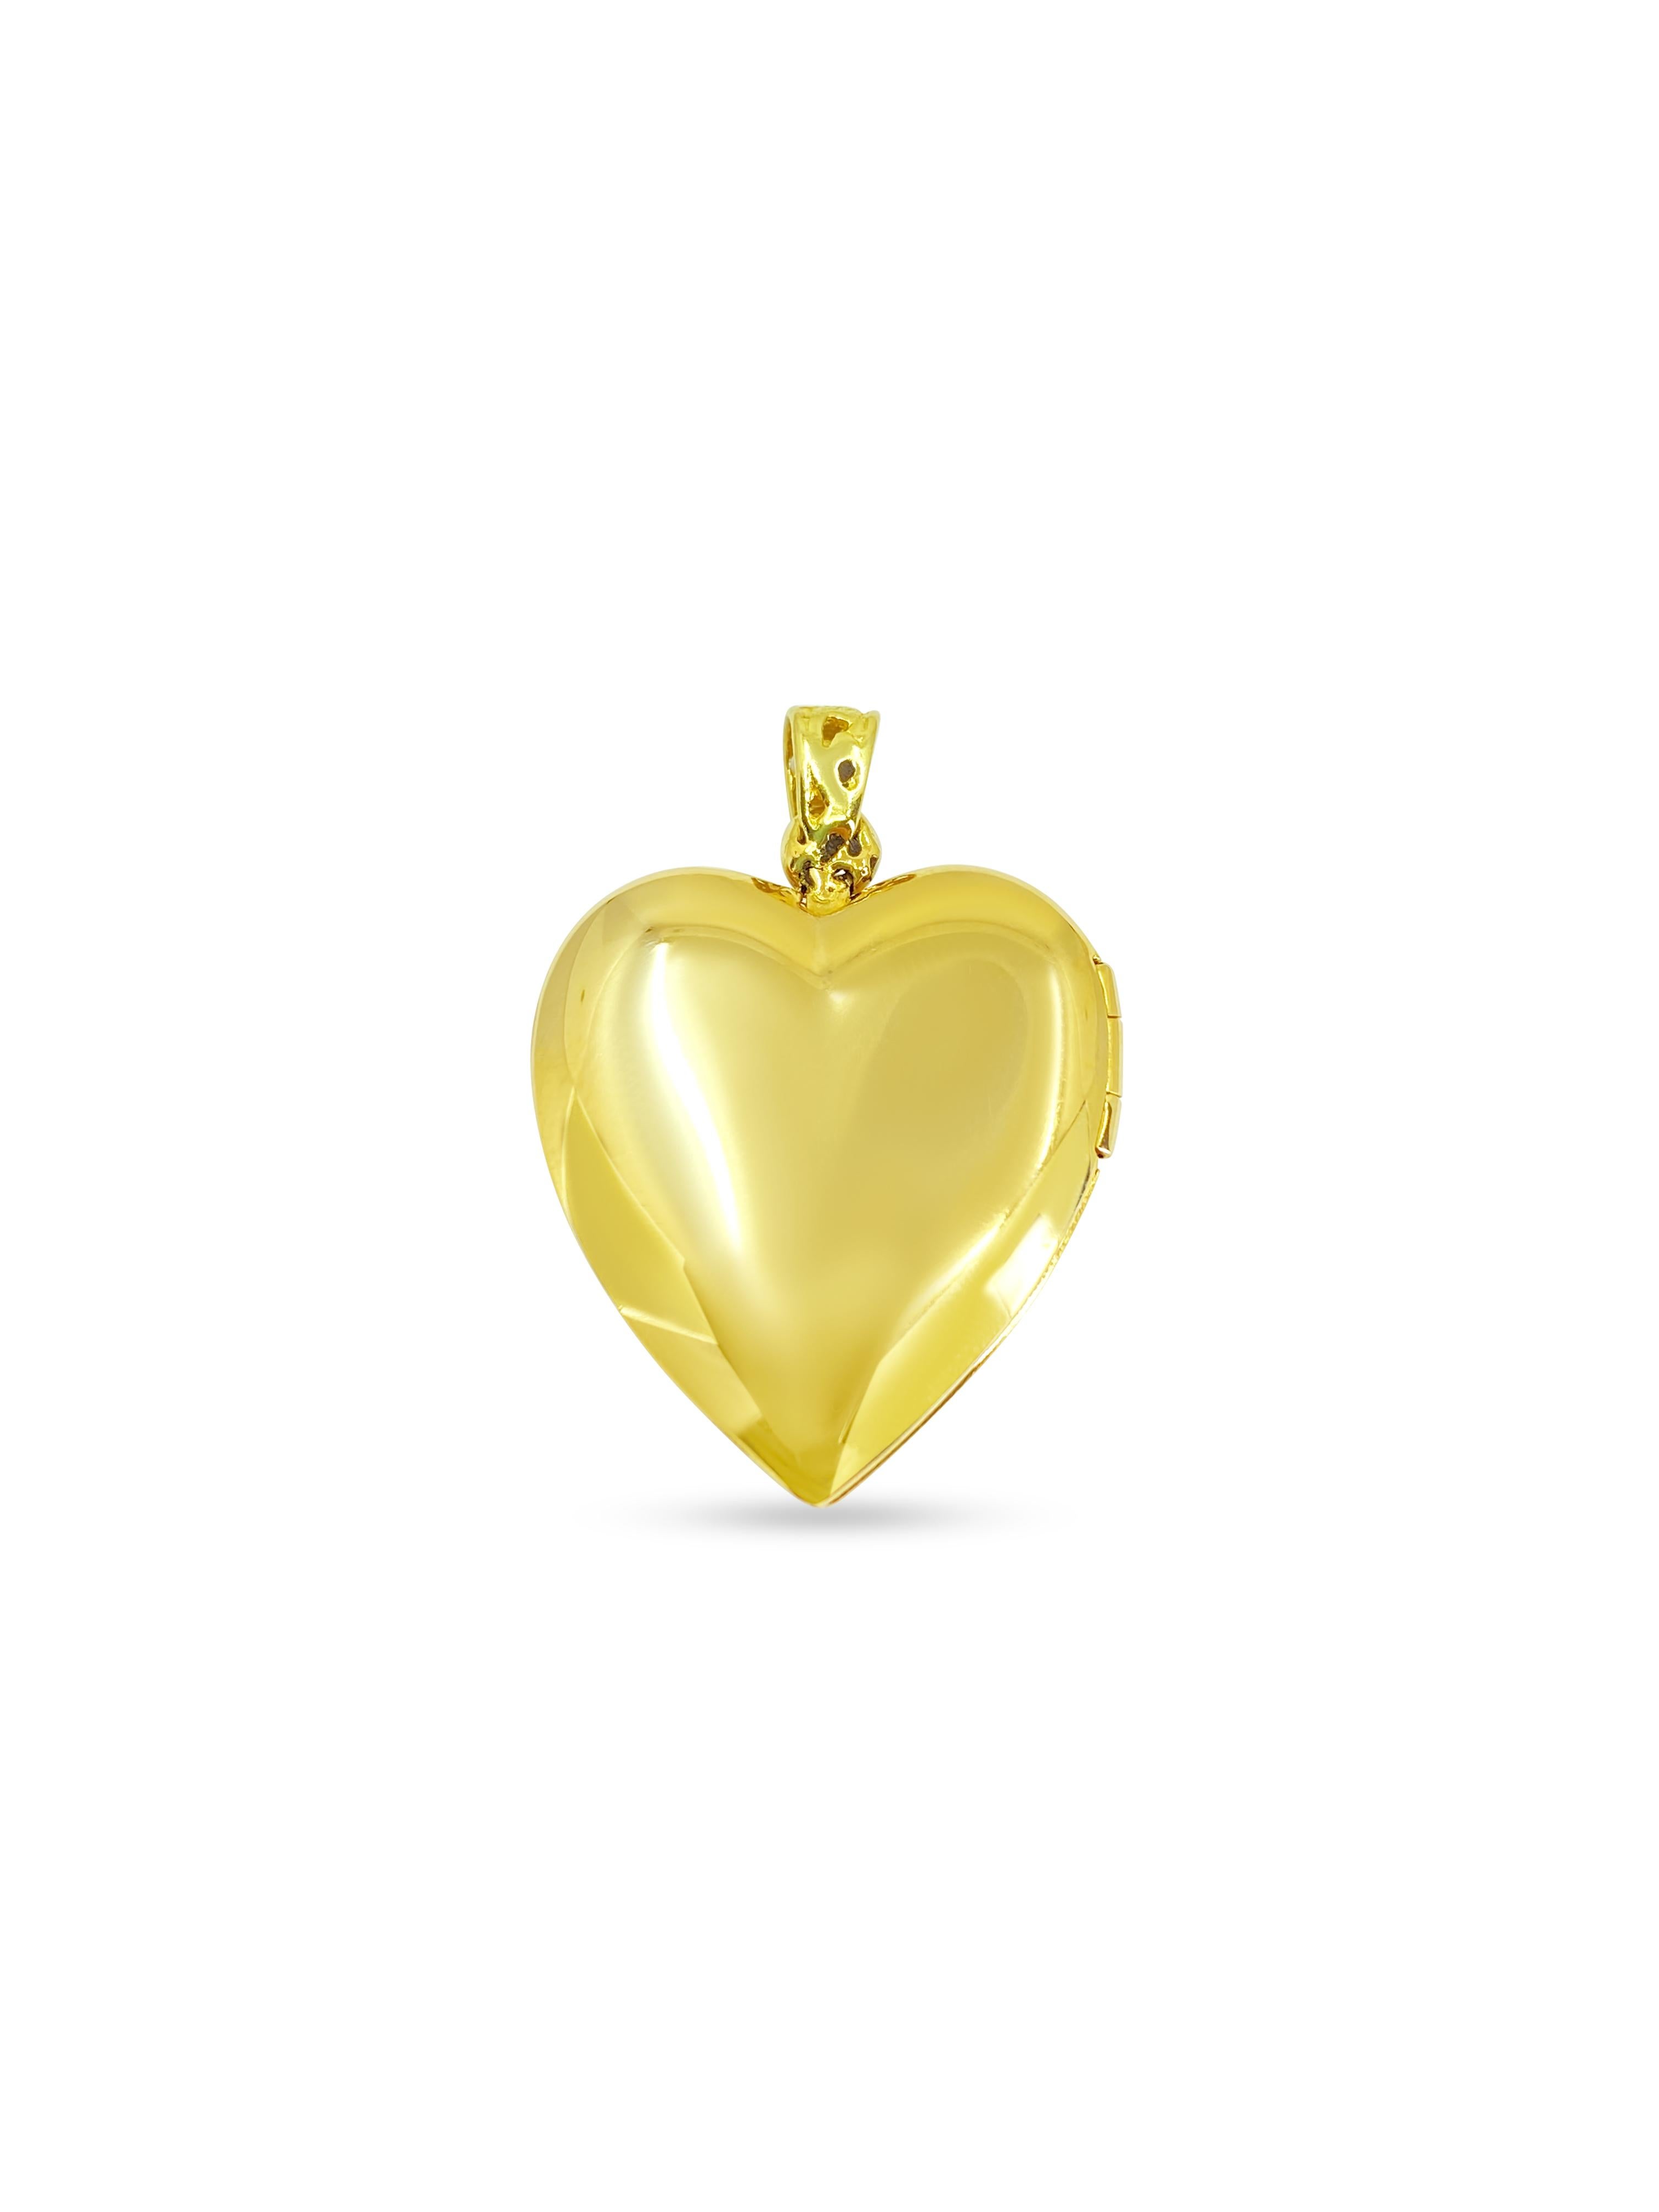 Crafted from 14k yellow gold, this vintage heart-shaped picture pendant is a timeless and romantic piece for her. Weighing 5.42 grams and measuring 3.30 x 2.40 cm, it offers a charming way to cherish cherished memories or loved ones close to the